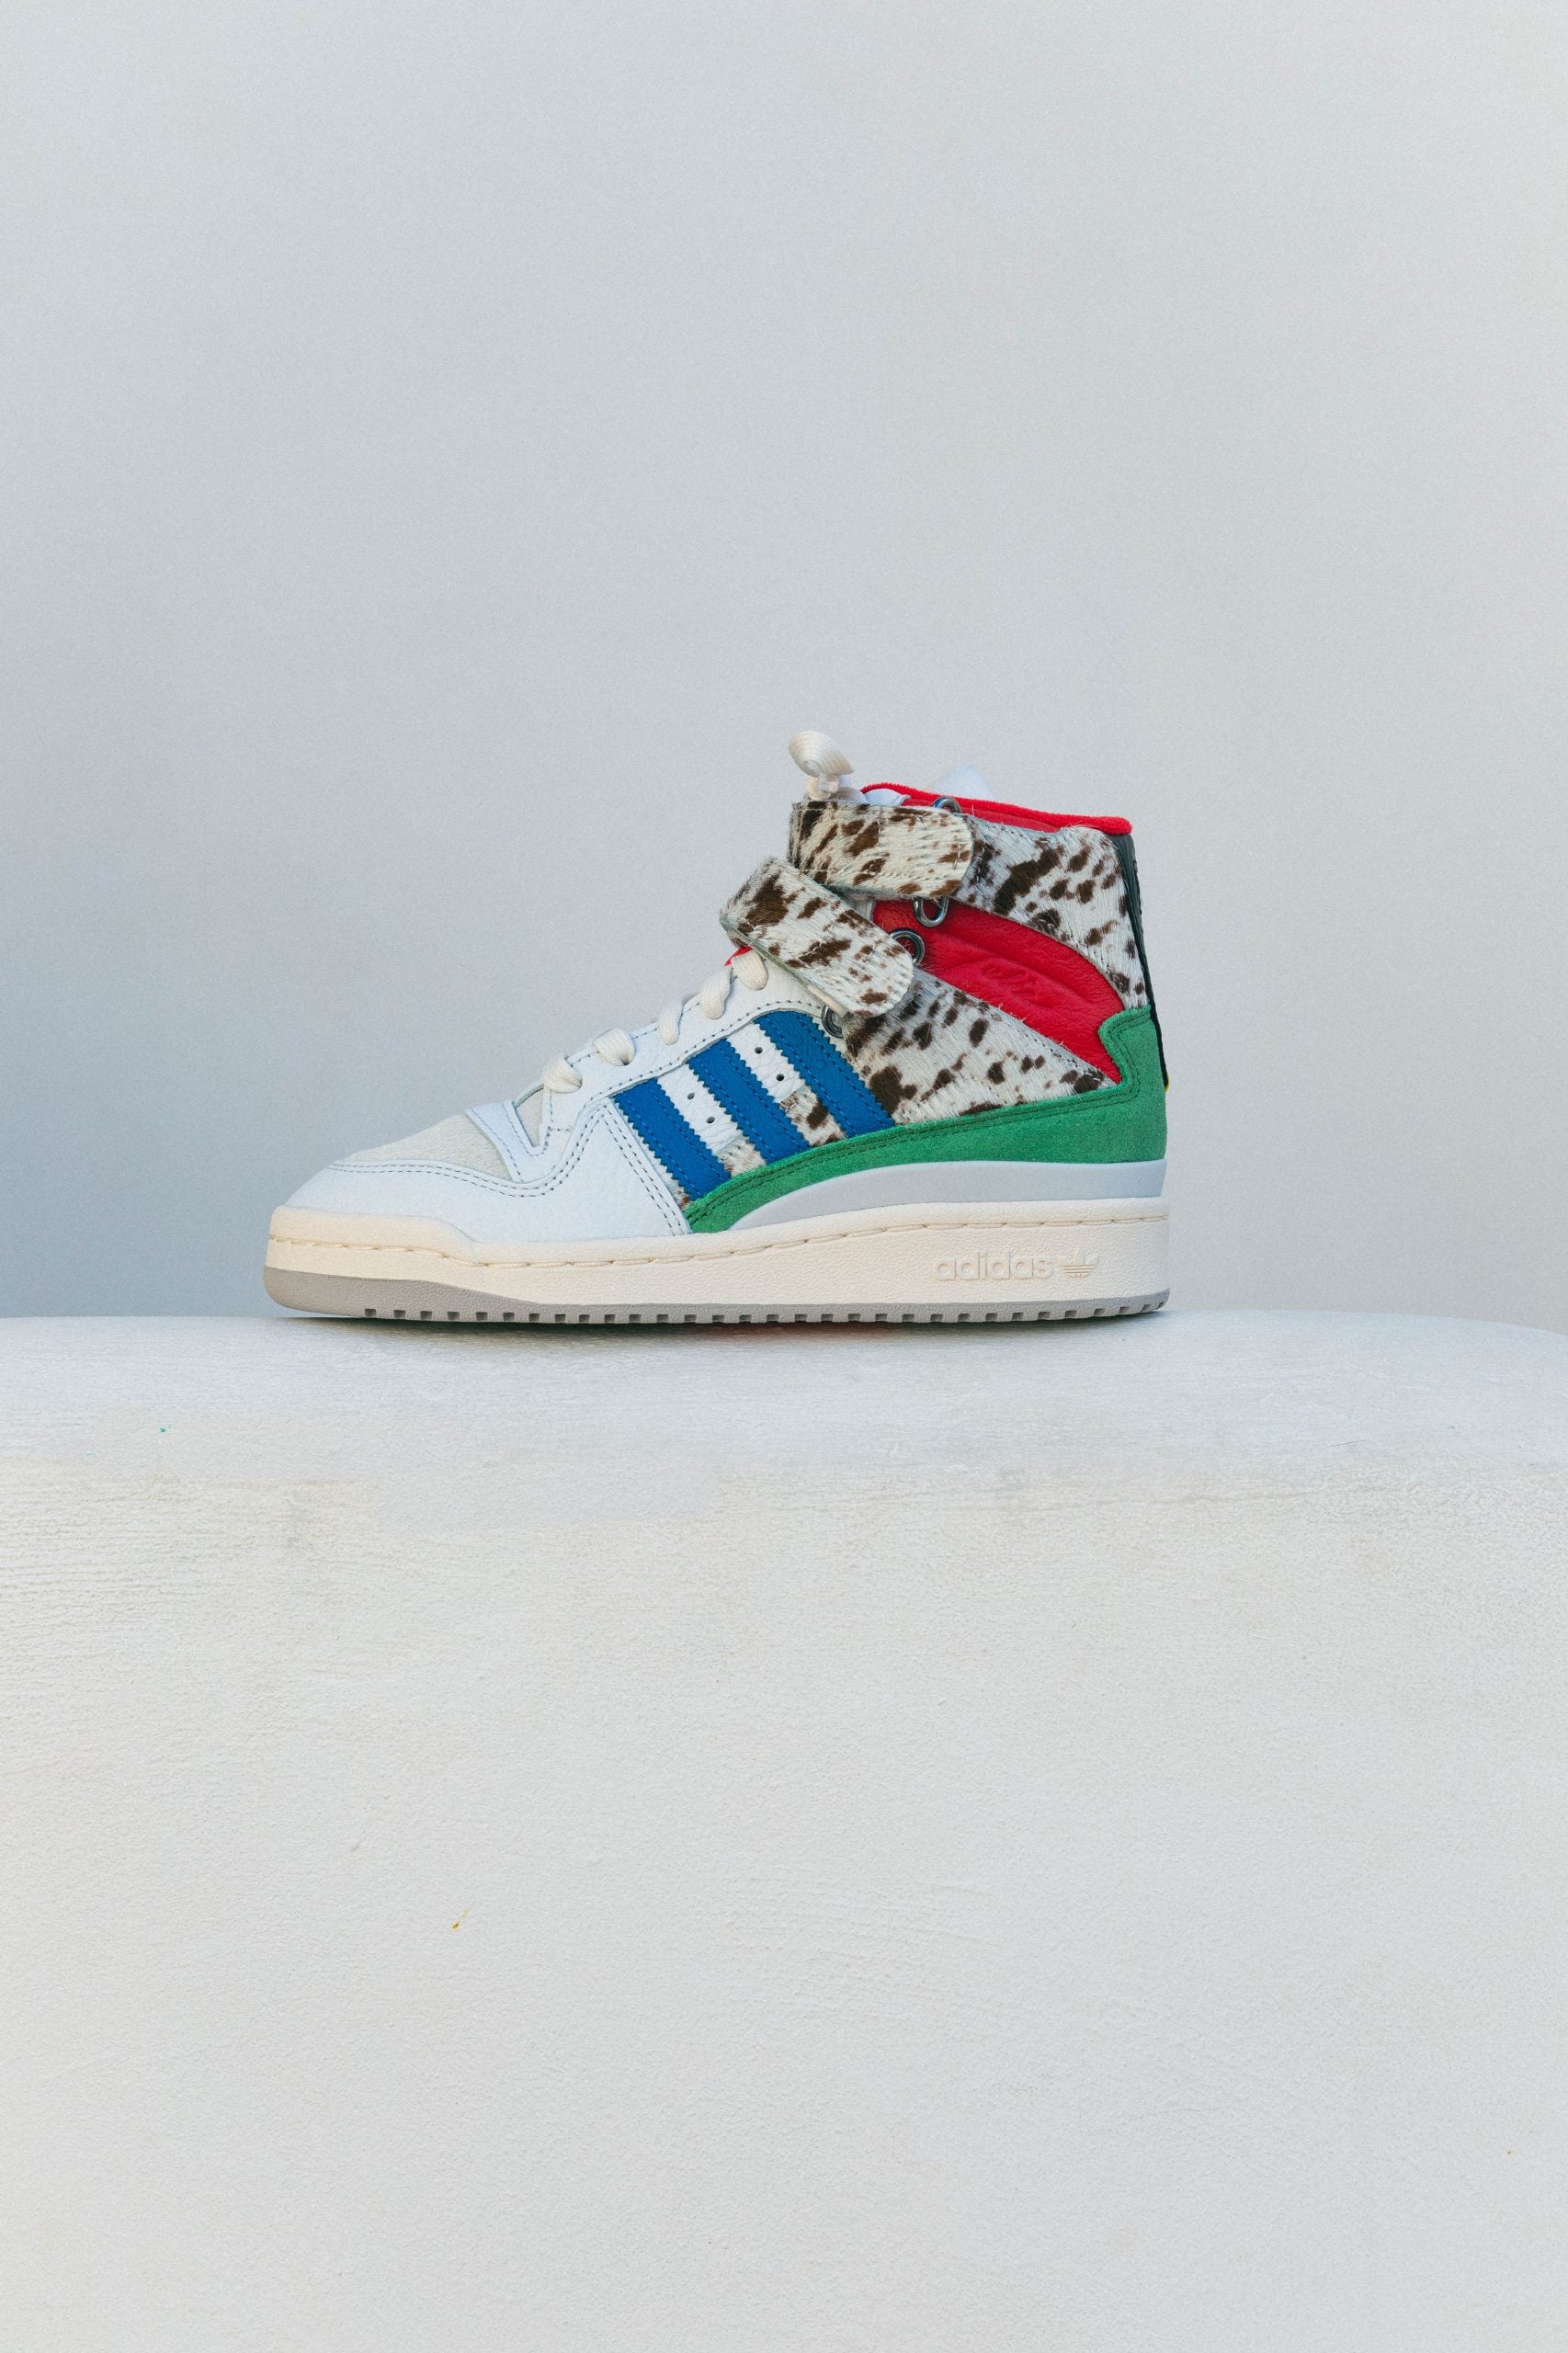 Adidas Taps Tulie Yaito For A Collab On The Classic Adidas Forum Hi